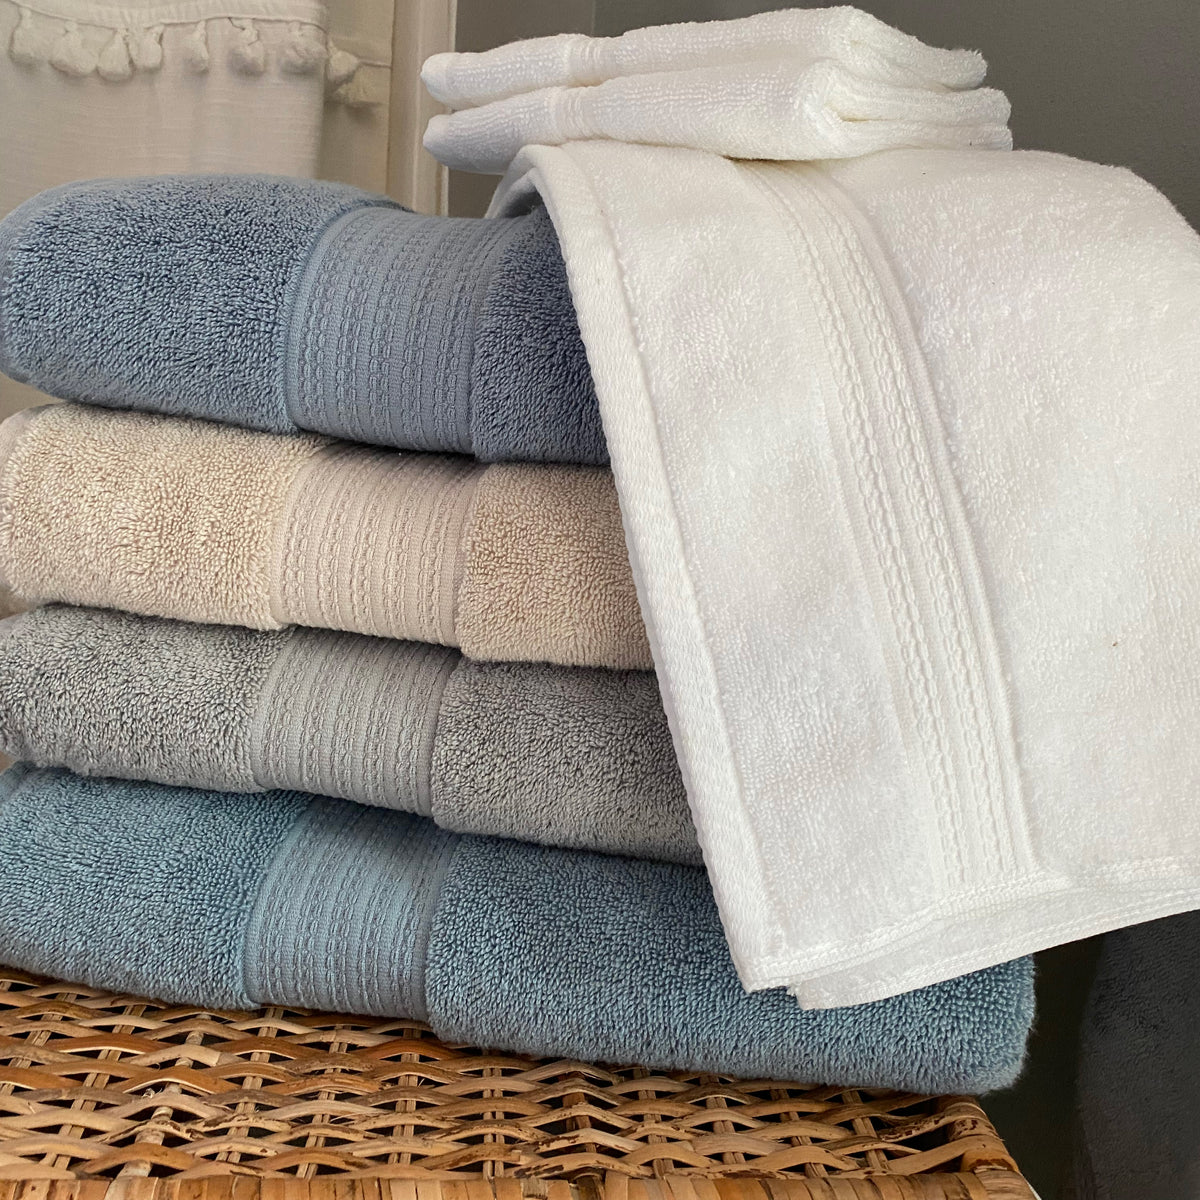 Multiple colors of American Choice towels stacked and folded